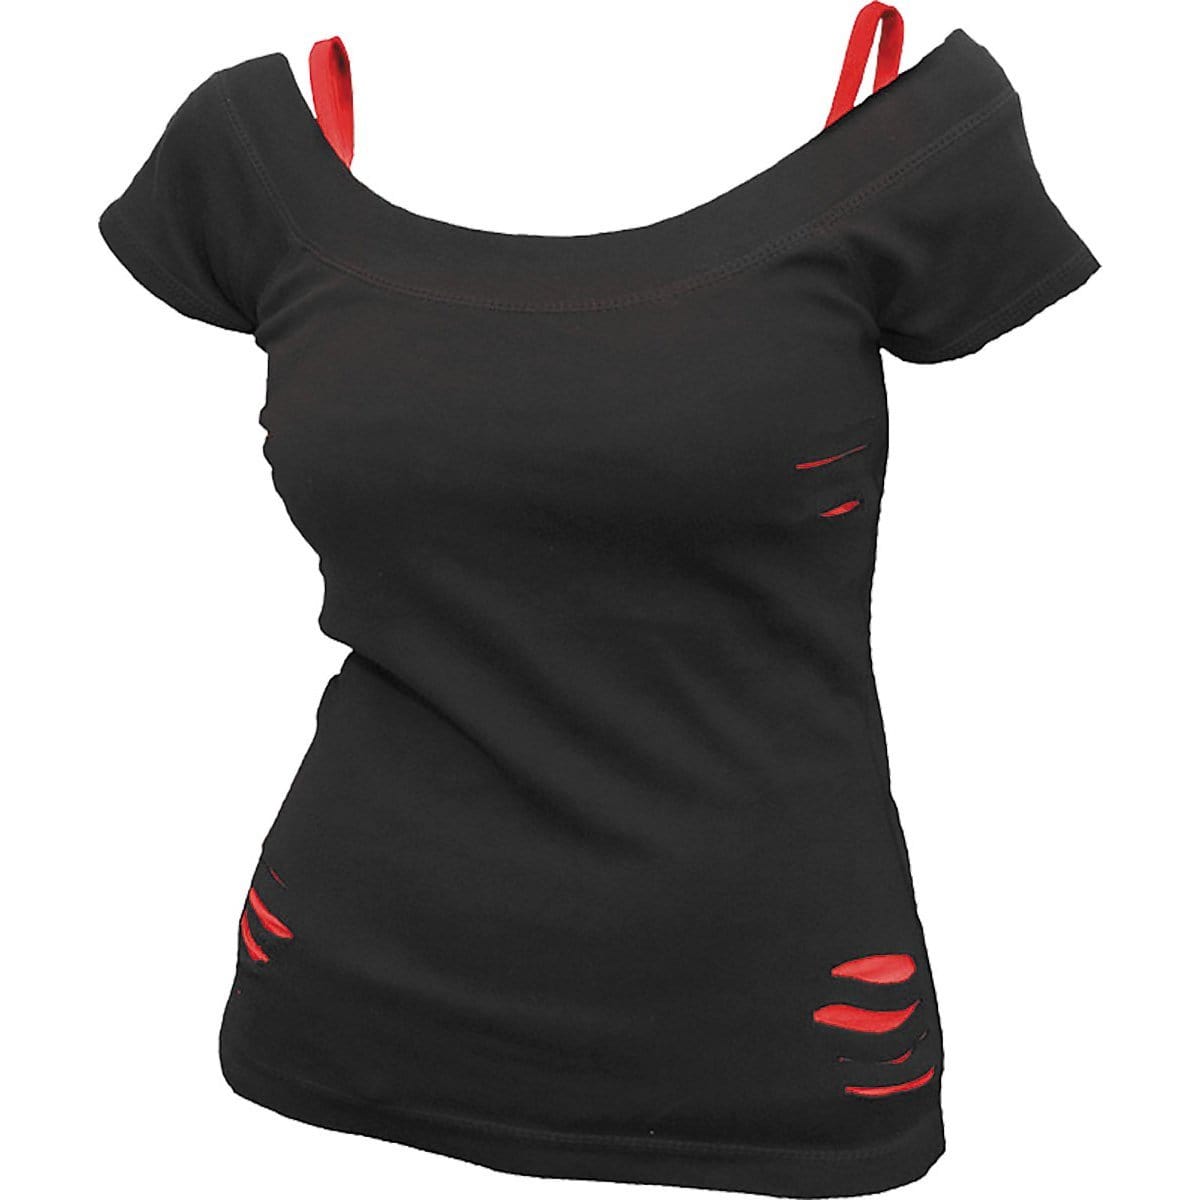 URBAN FASHION - 2in1 Red Ripped Black Top